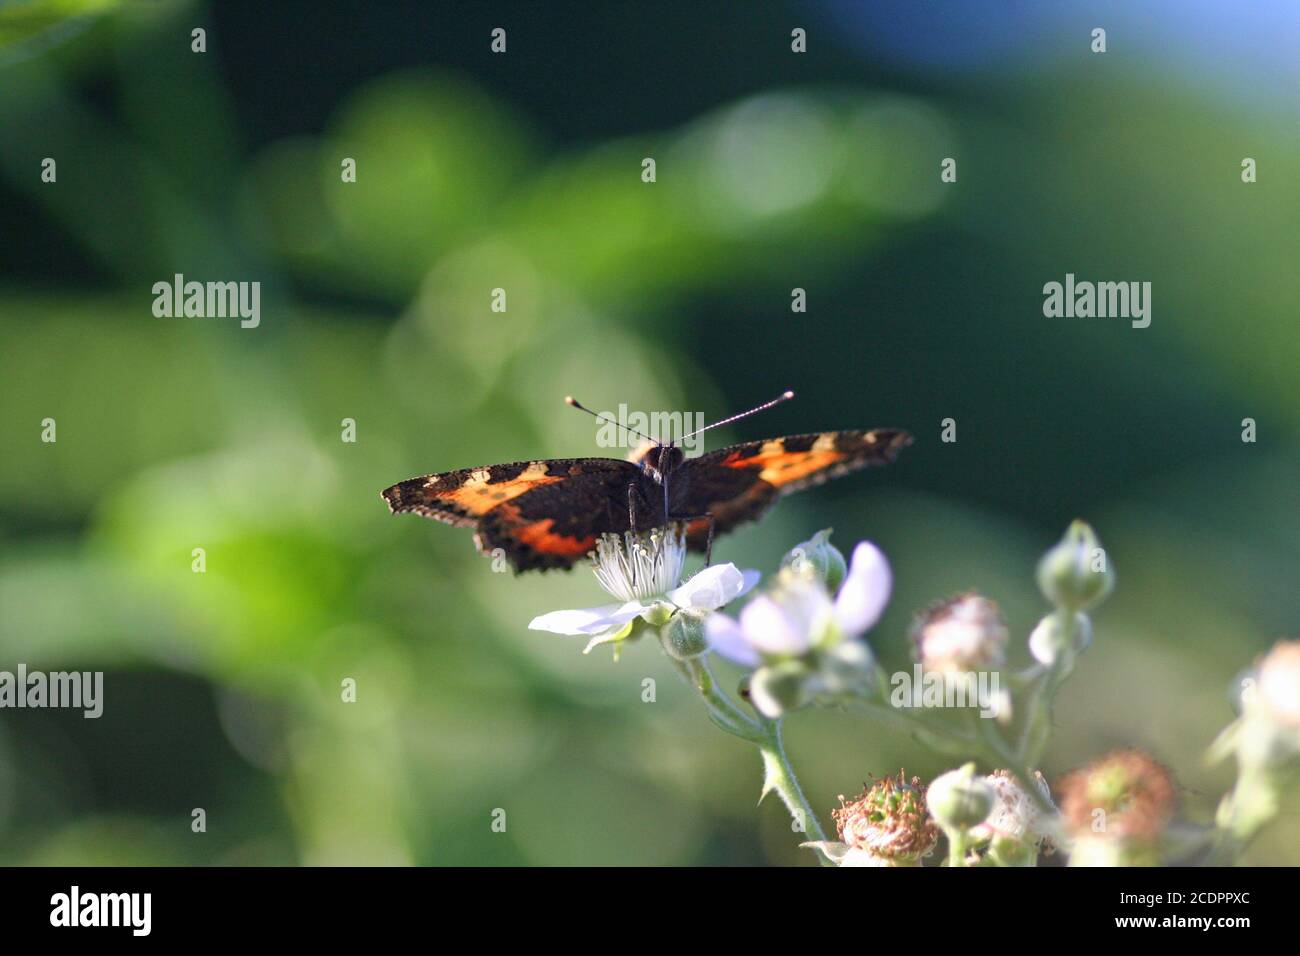 Butterfly on a blackberry blossom Stock Photo